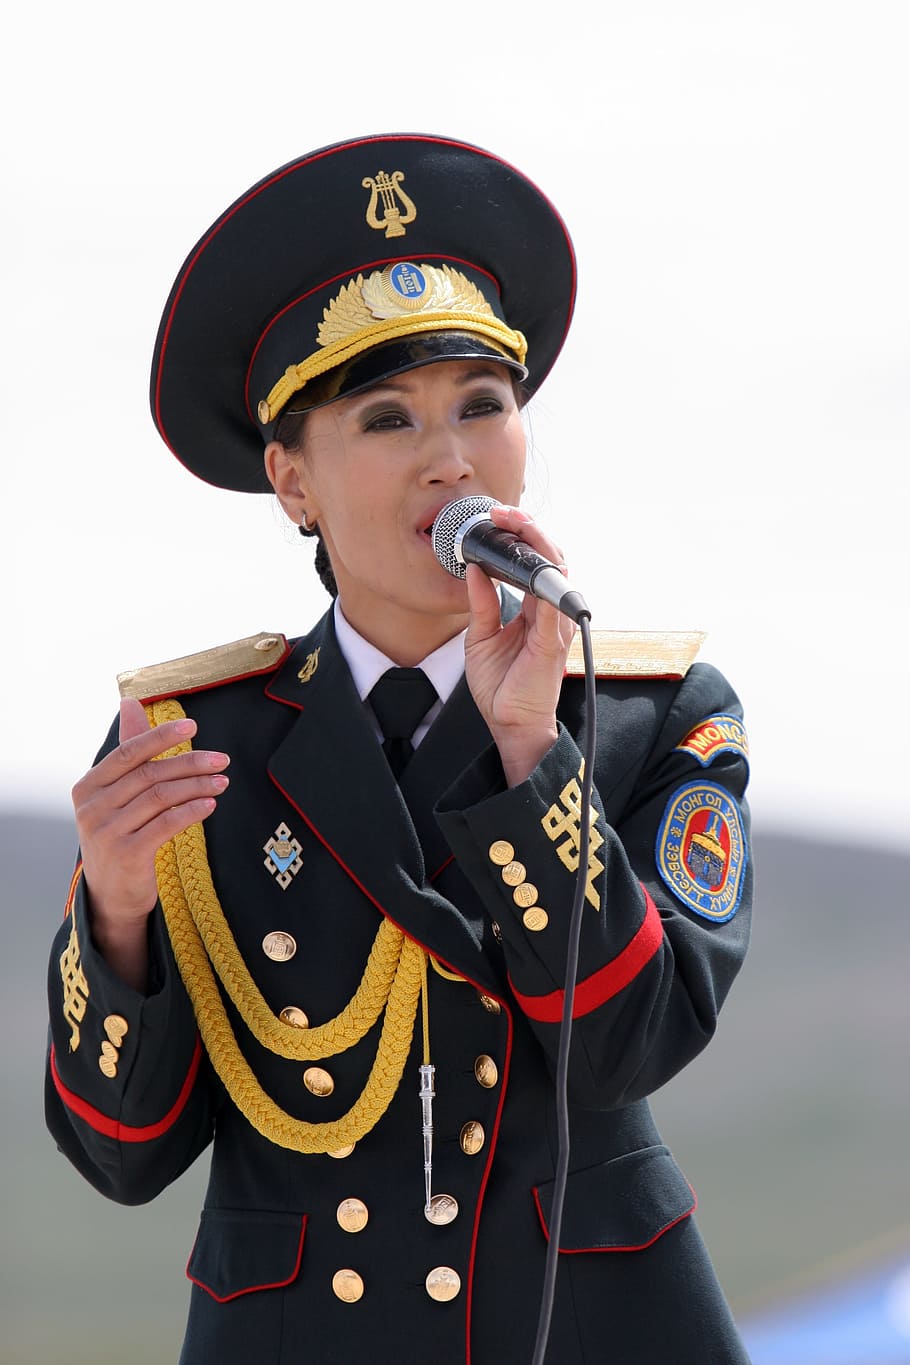 comparing, military, army, singer, music, musician, clothing, hat, uniform, front view